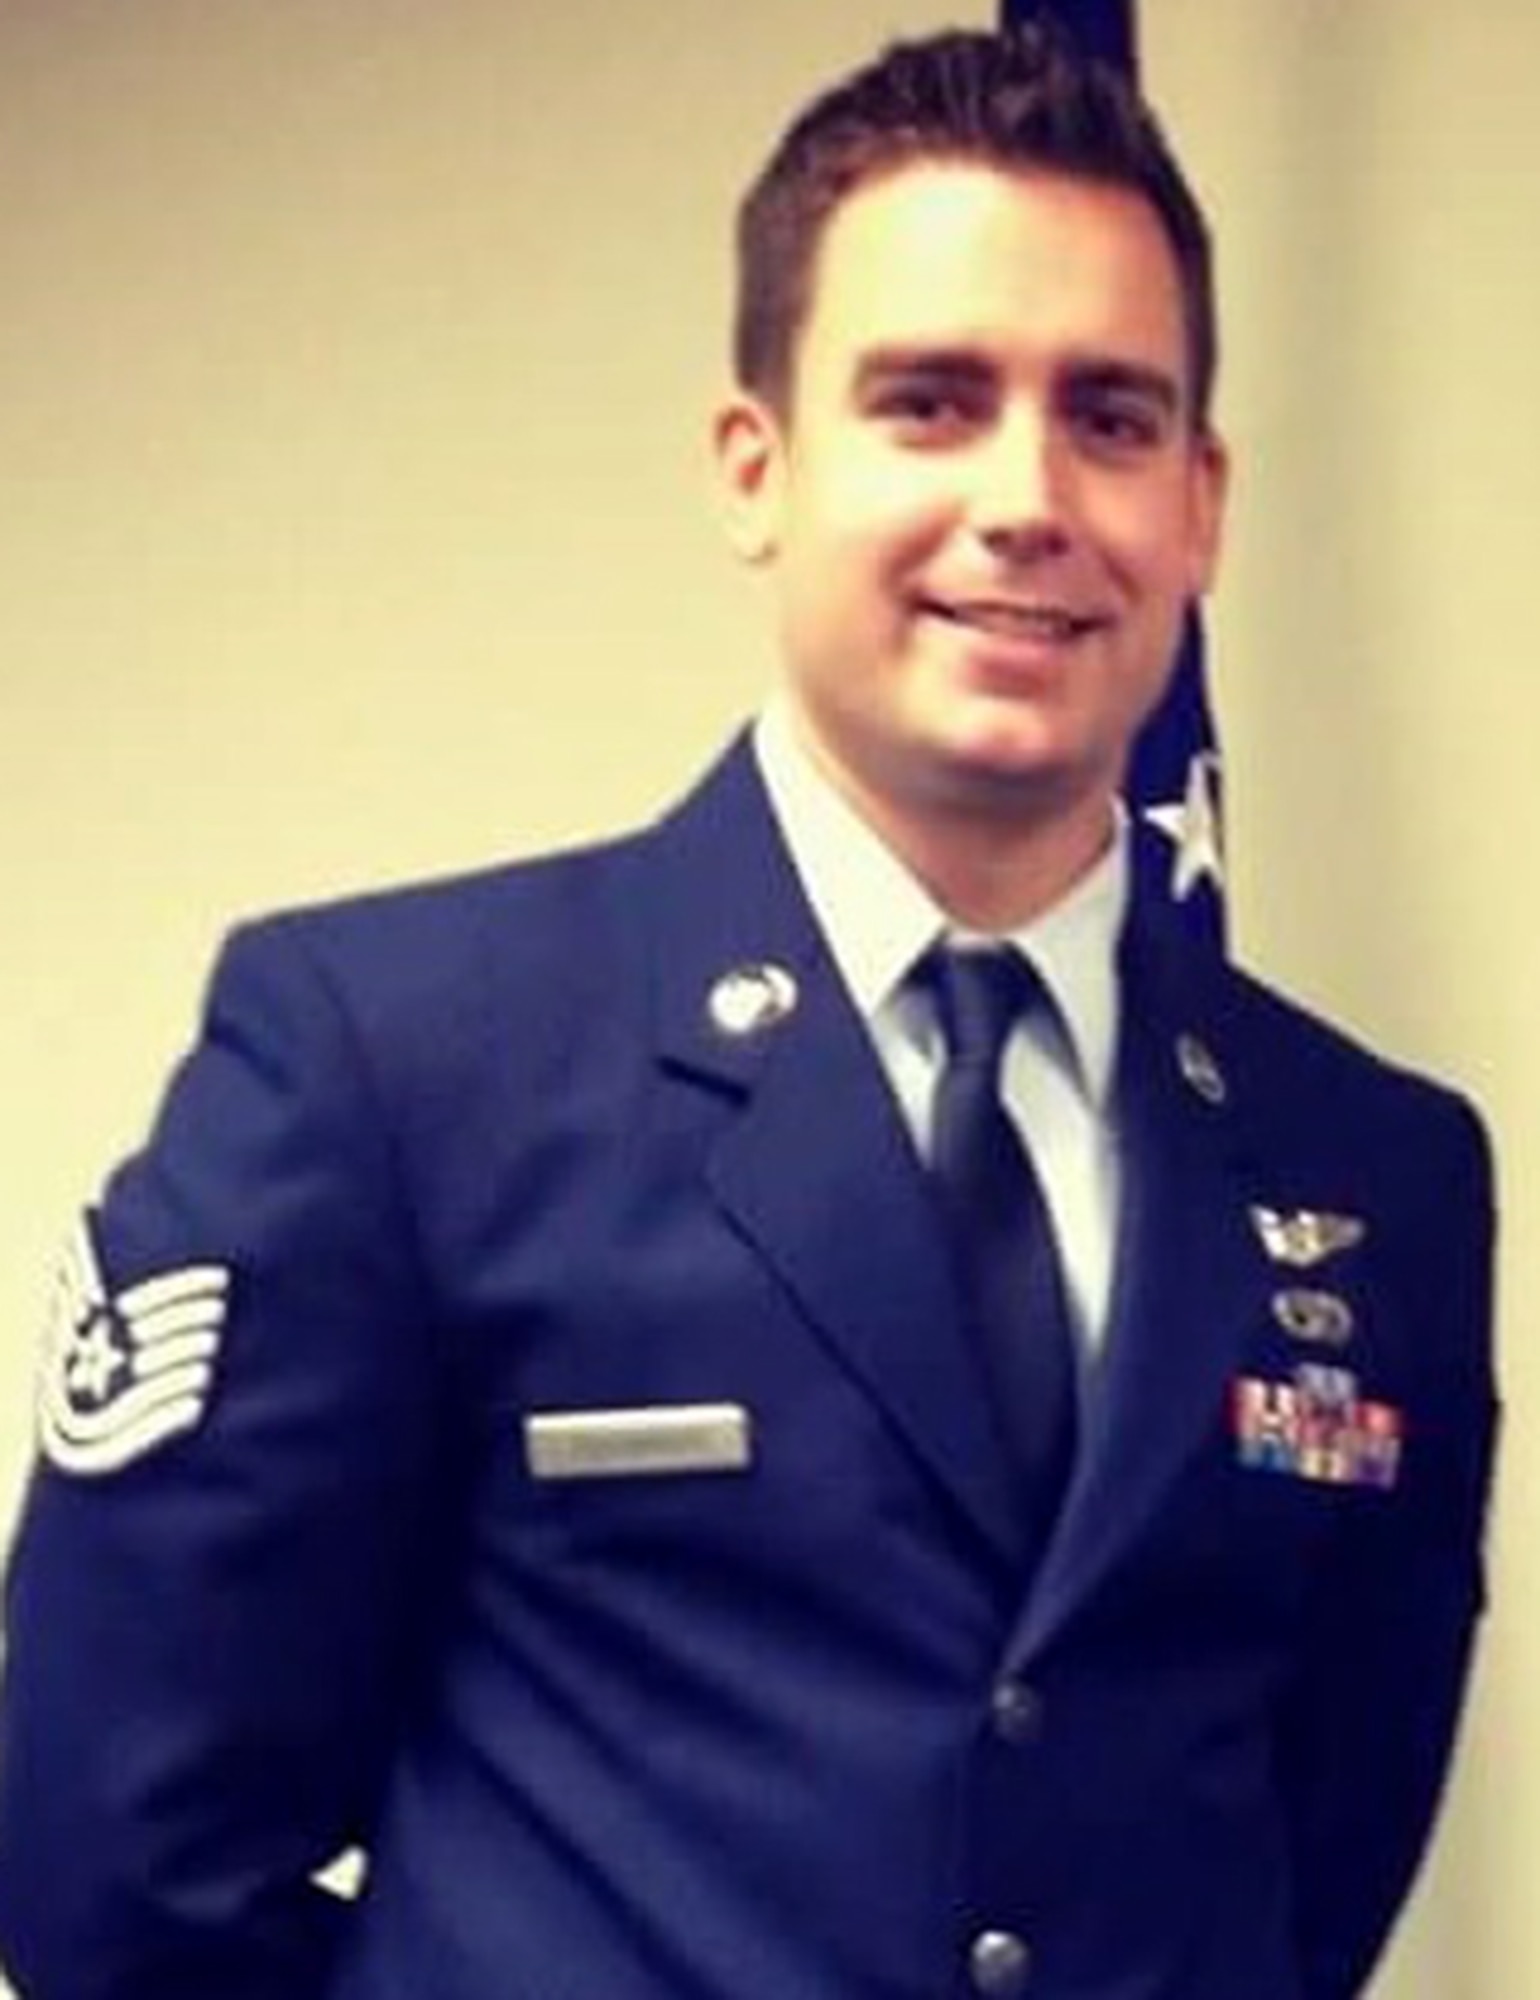 Tech Sgt. Michael Johannsen, a remotely piloted vehicle senor operator with the 91st Attack Squadron, Creech Air Force Base, Nevada, was killed in an auto accident near Indian Springs April 19. According to Nevada Highway Patrol reports, Johannsen's vehicle was struck head-on by a driver approaching in the wrong lane. The driver of the other vehicle was also killed. (Courtesy photo)